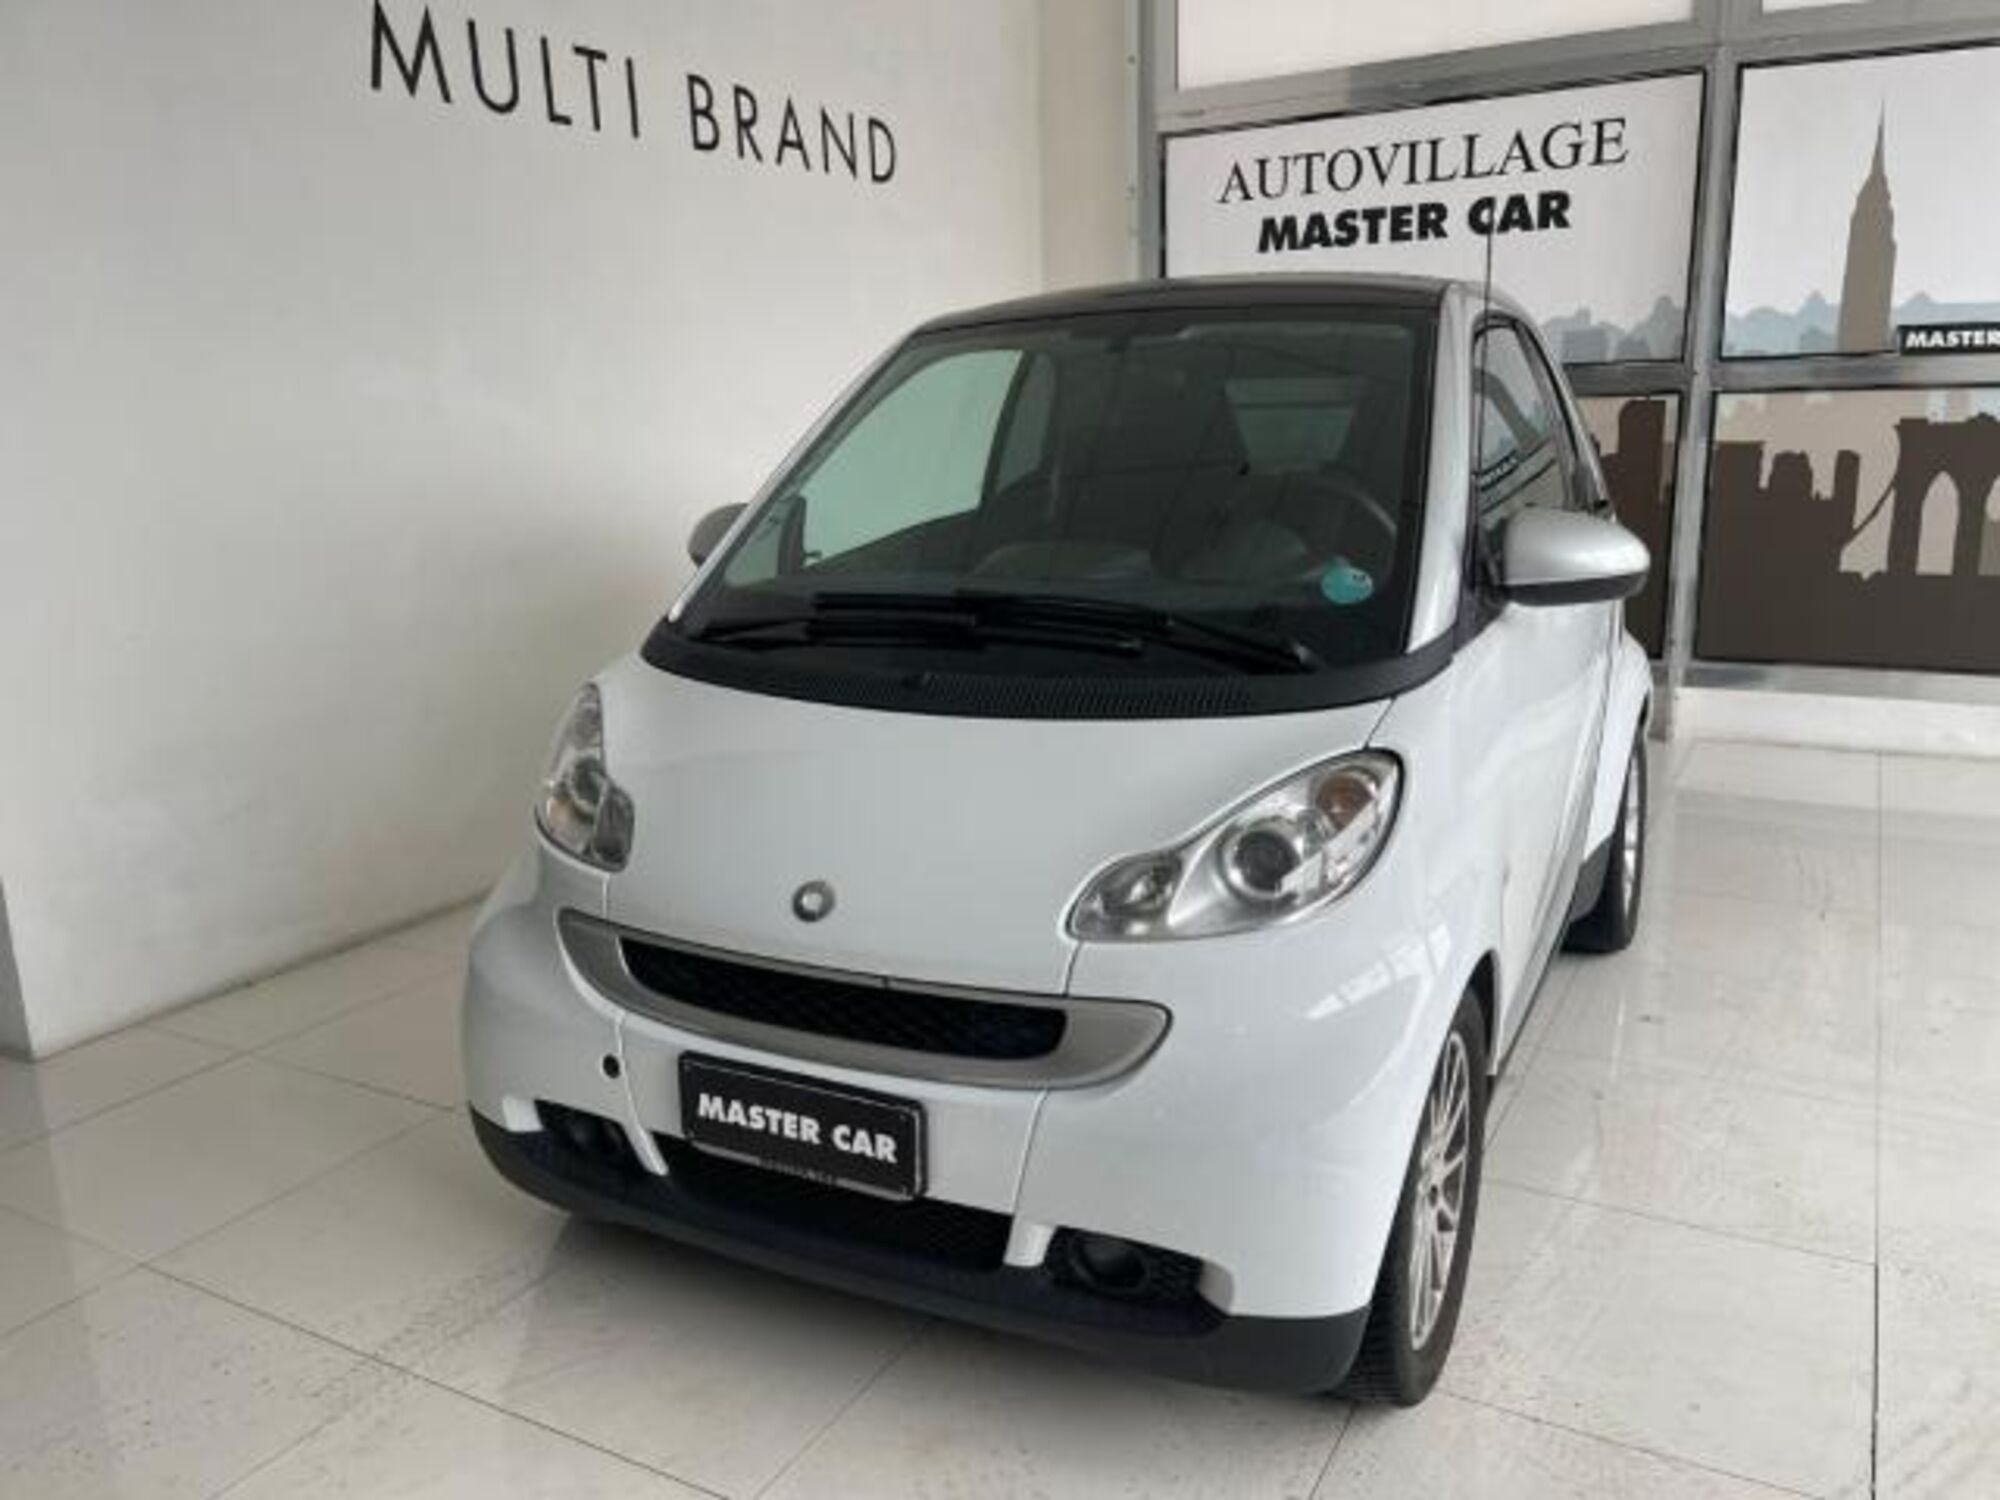 smart fortwo 1000 52 kW MHD coupé passion 